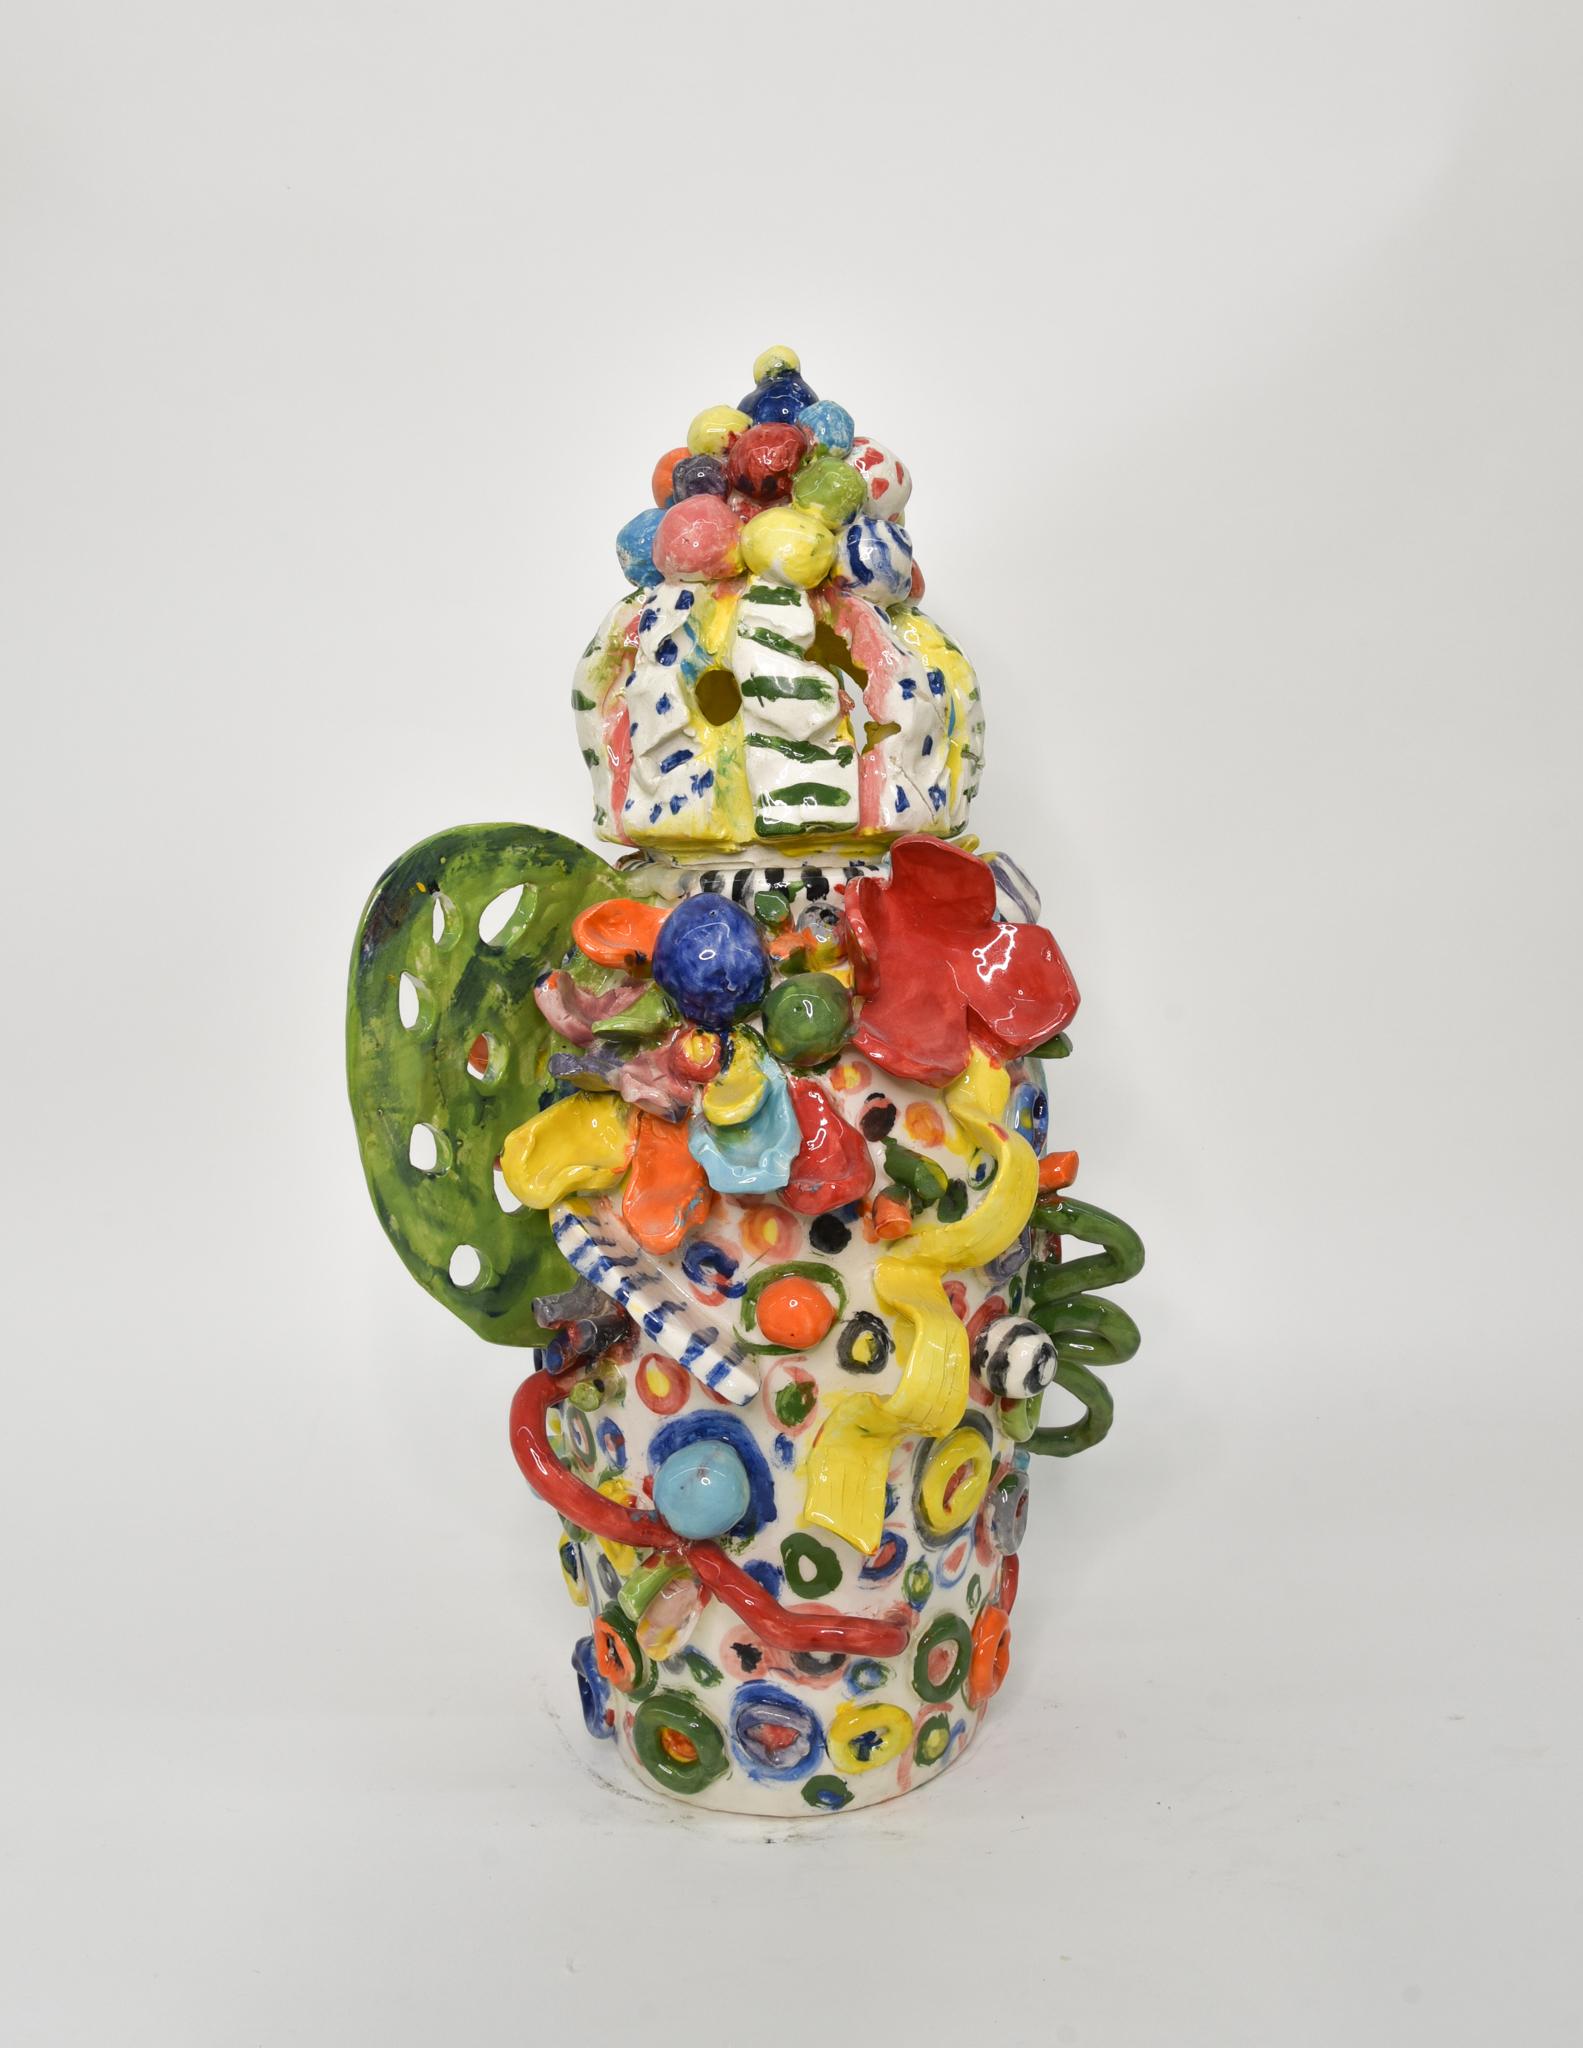 Untitled XVI. Glazed ceramic abstract jar  sculpture - Sculpture by Charo Oquet